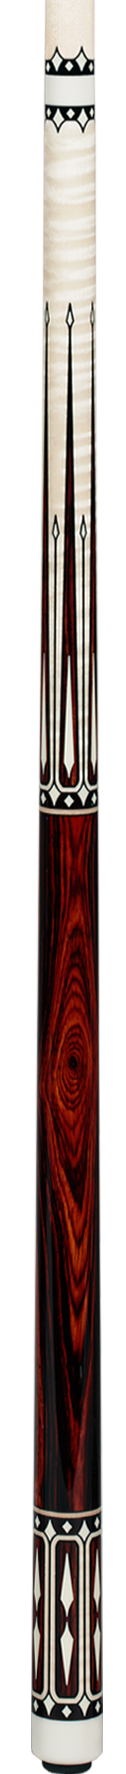 Pechauer Pechauer PL-28 Limited Edition Pool Cue Pool Cue